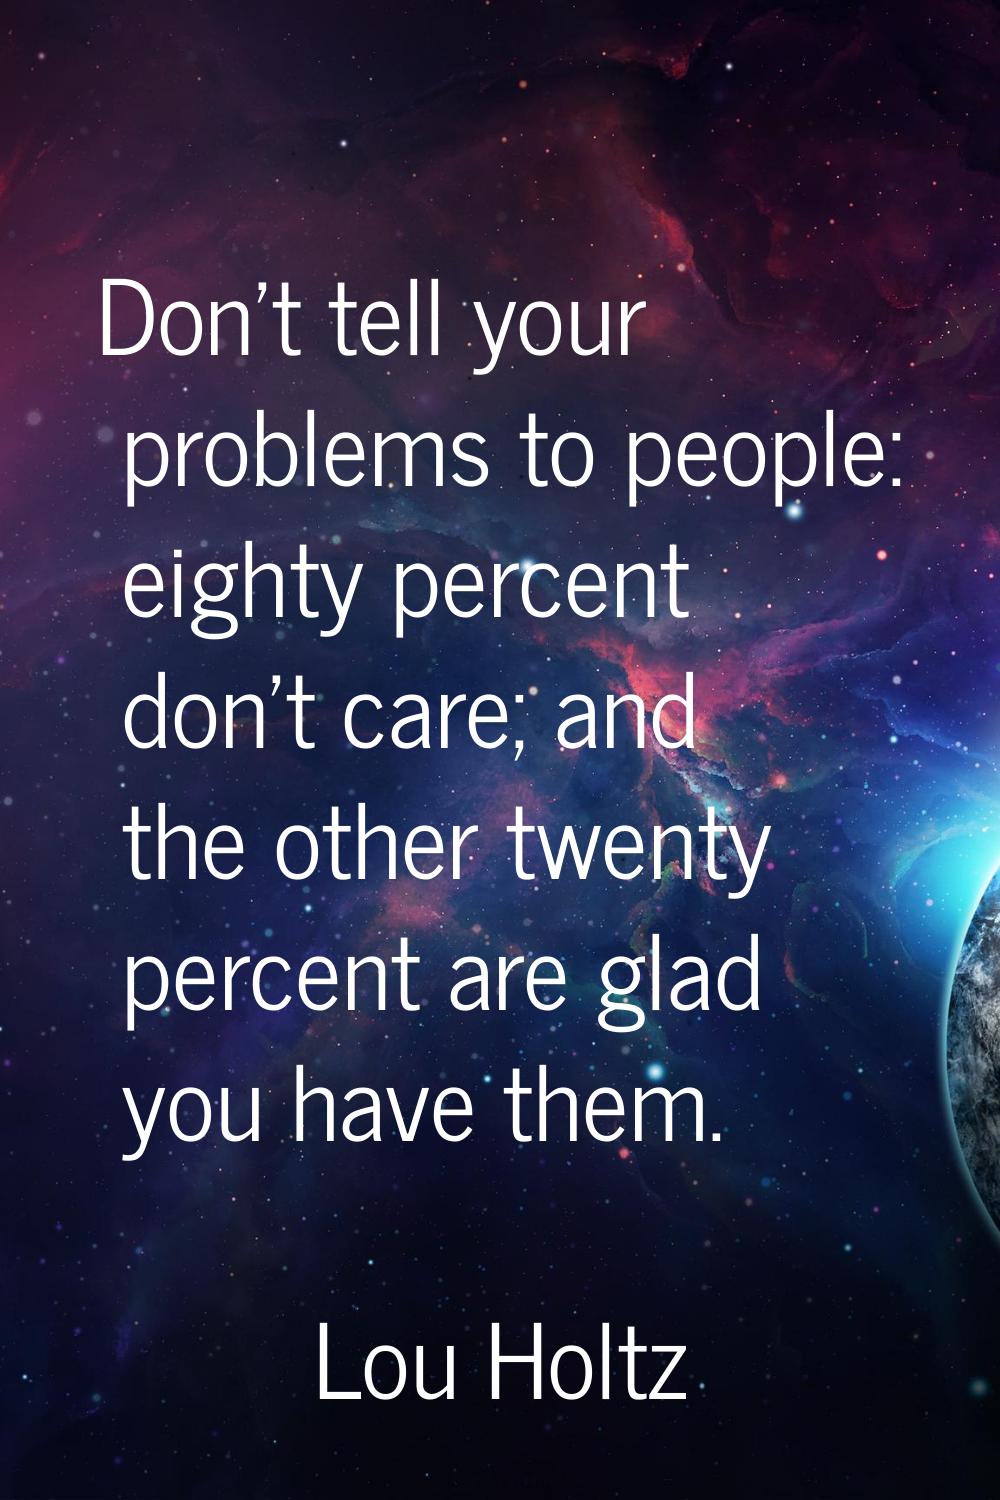 Don't tell your problems to people: eighty percent don't care; and the other twenty percent are gla